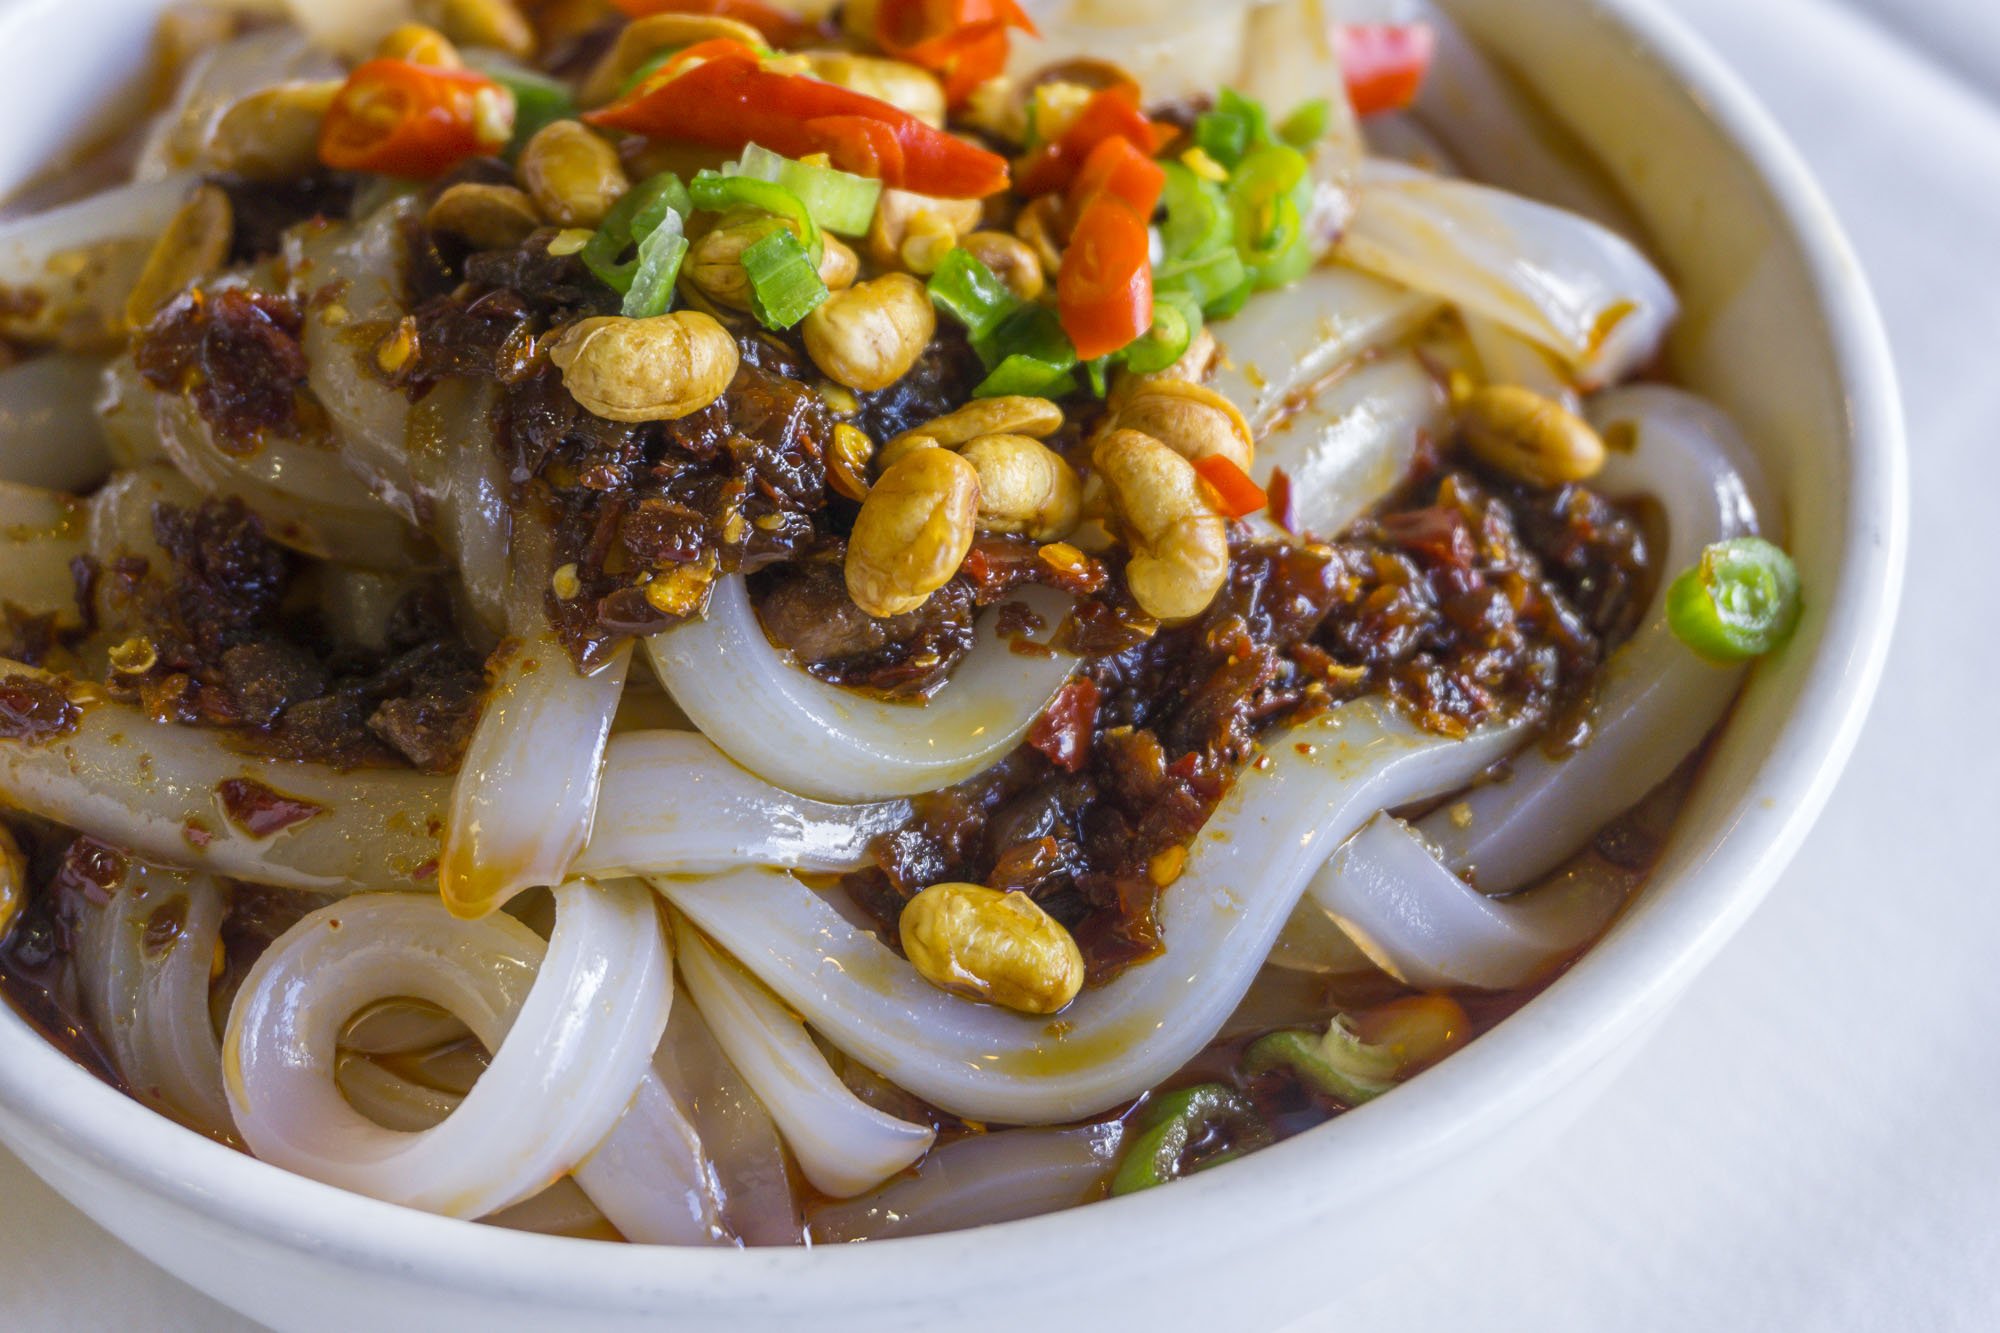 A closeup view of Chengdu Taste’s mung bean jelly noodles with chili sauce.